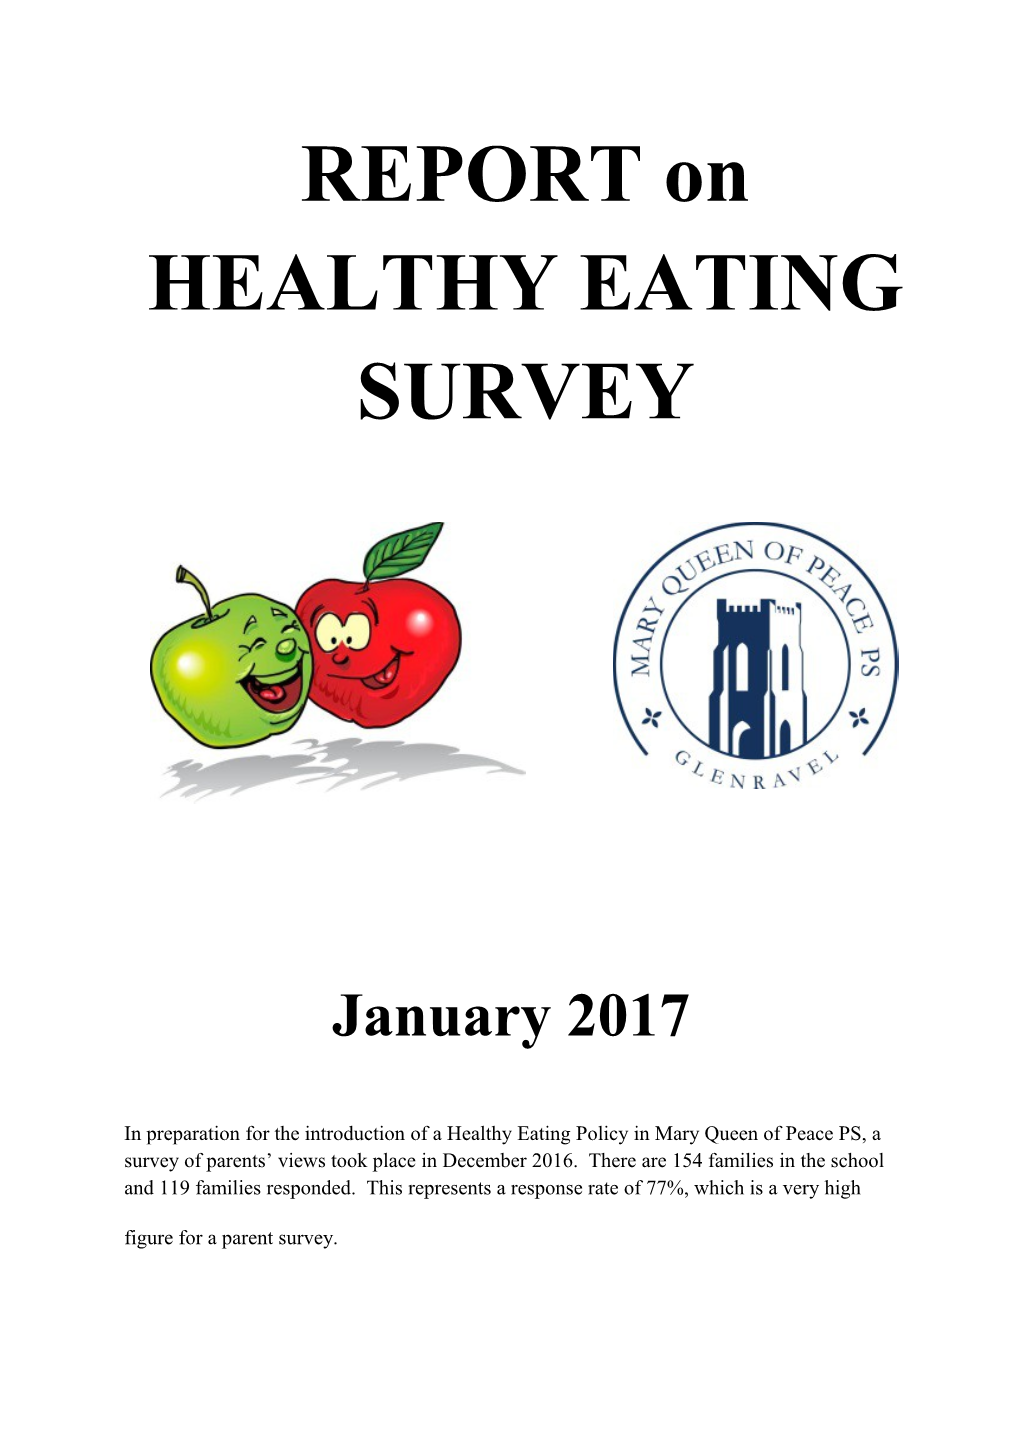 REPORT on HEALTHY EATING SURVEY